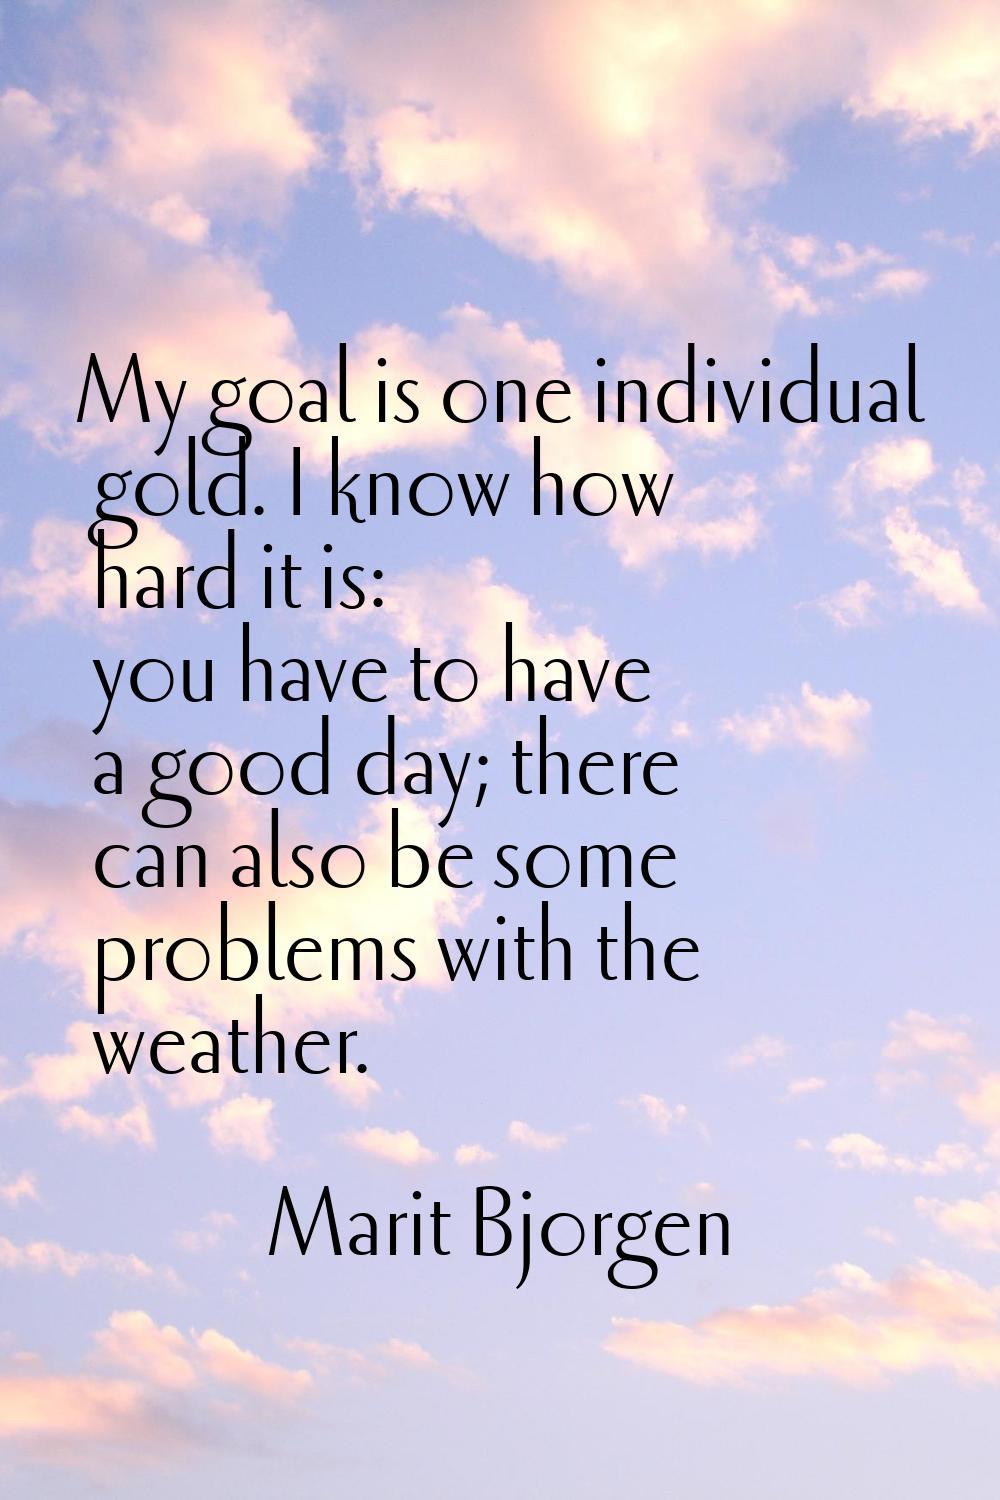 My goal is one individual gold. I know how hard it is: you have to have a good day; there can also 